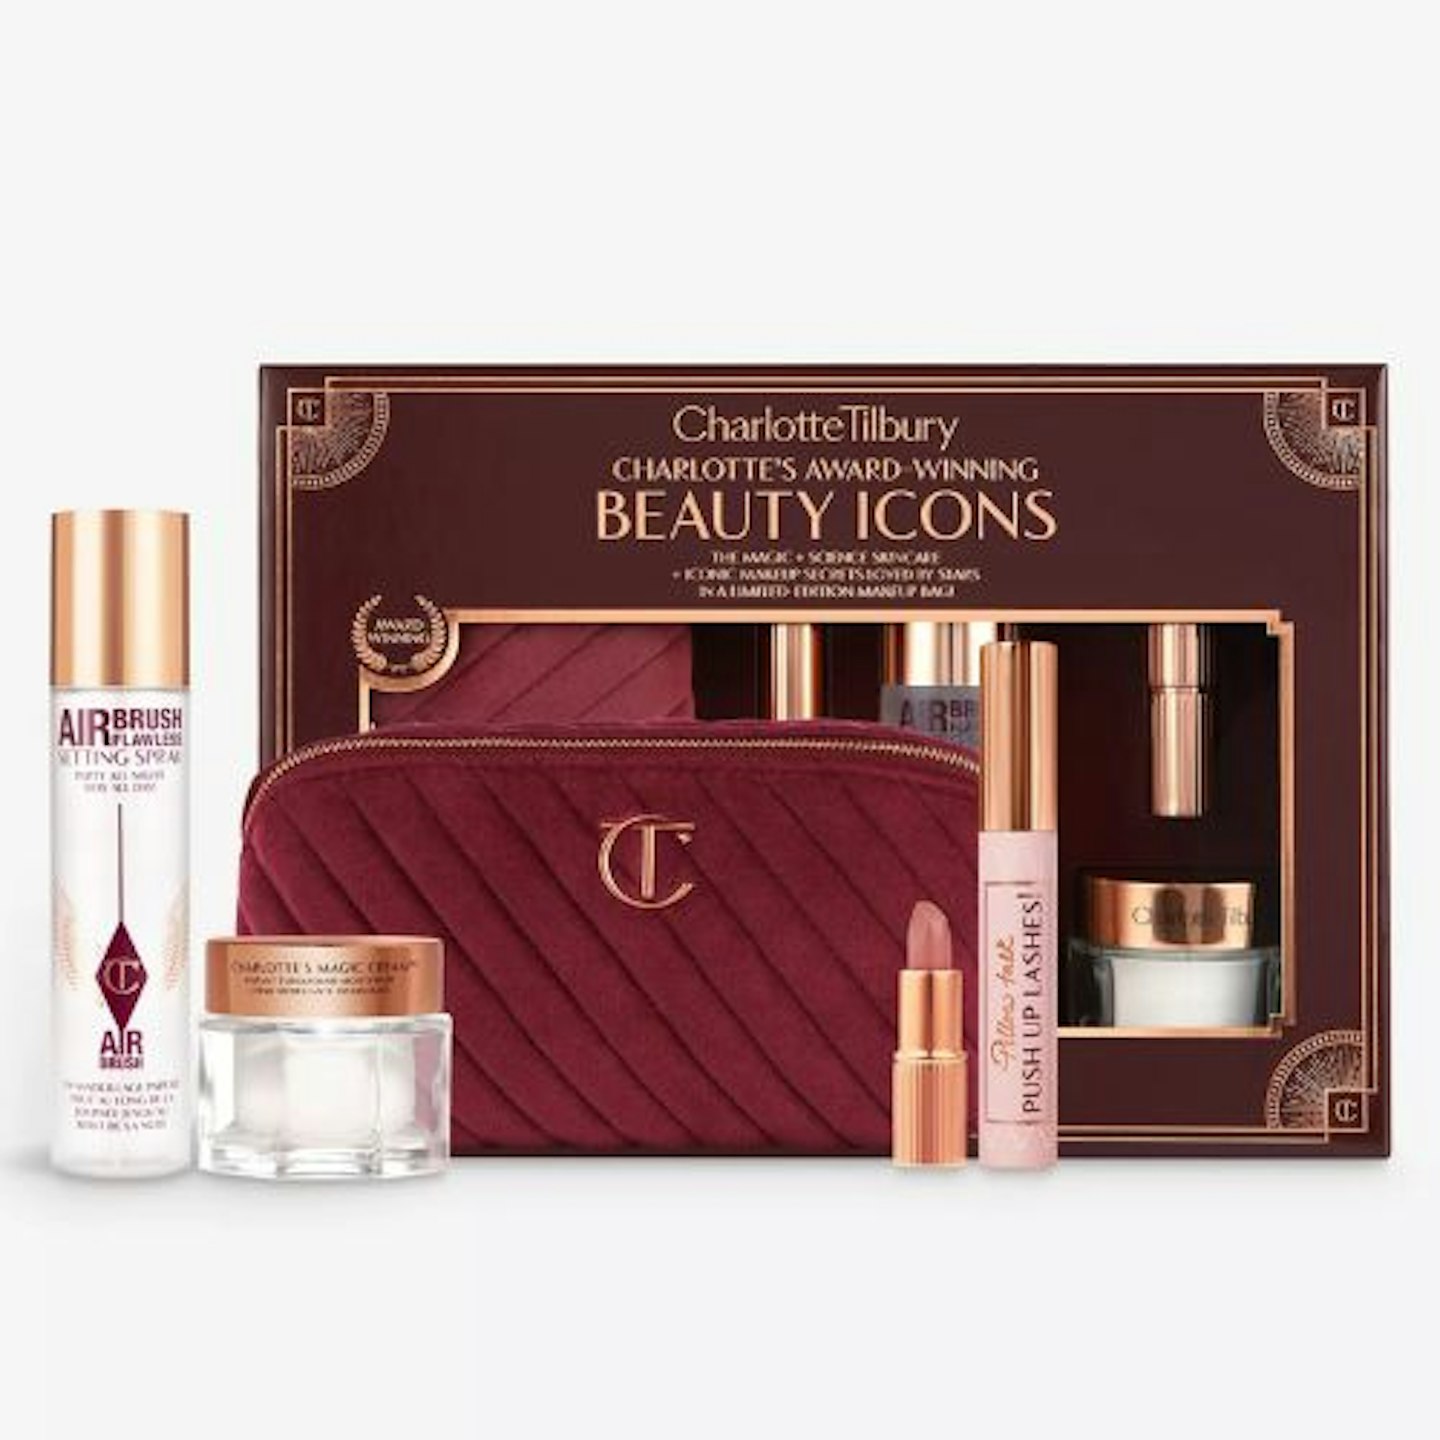 Charlotte Tilbury Beauty Icons limited-Edition Gift Set